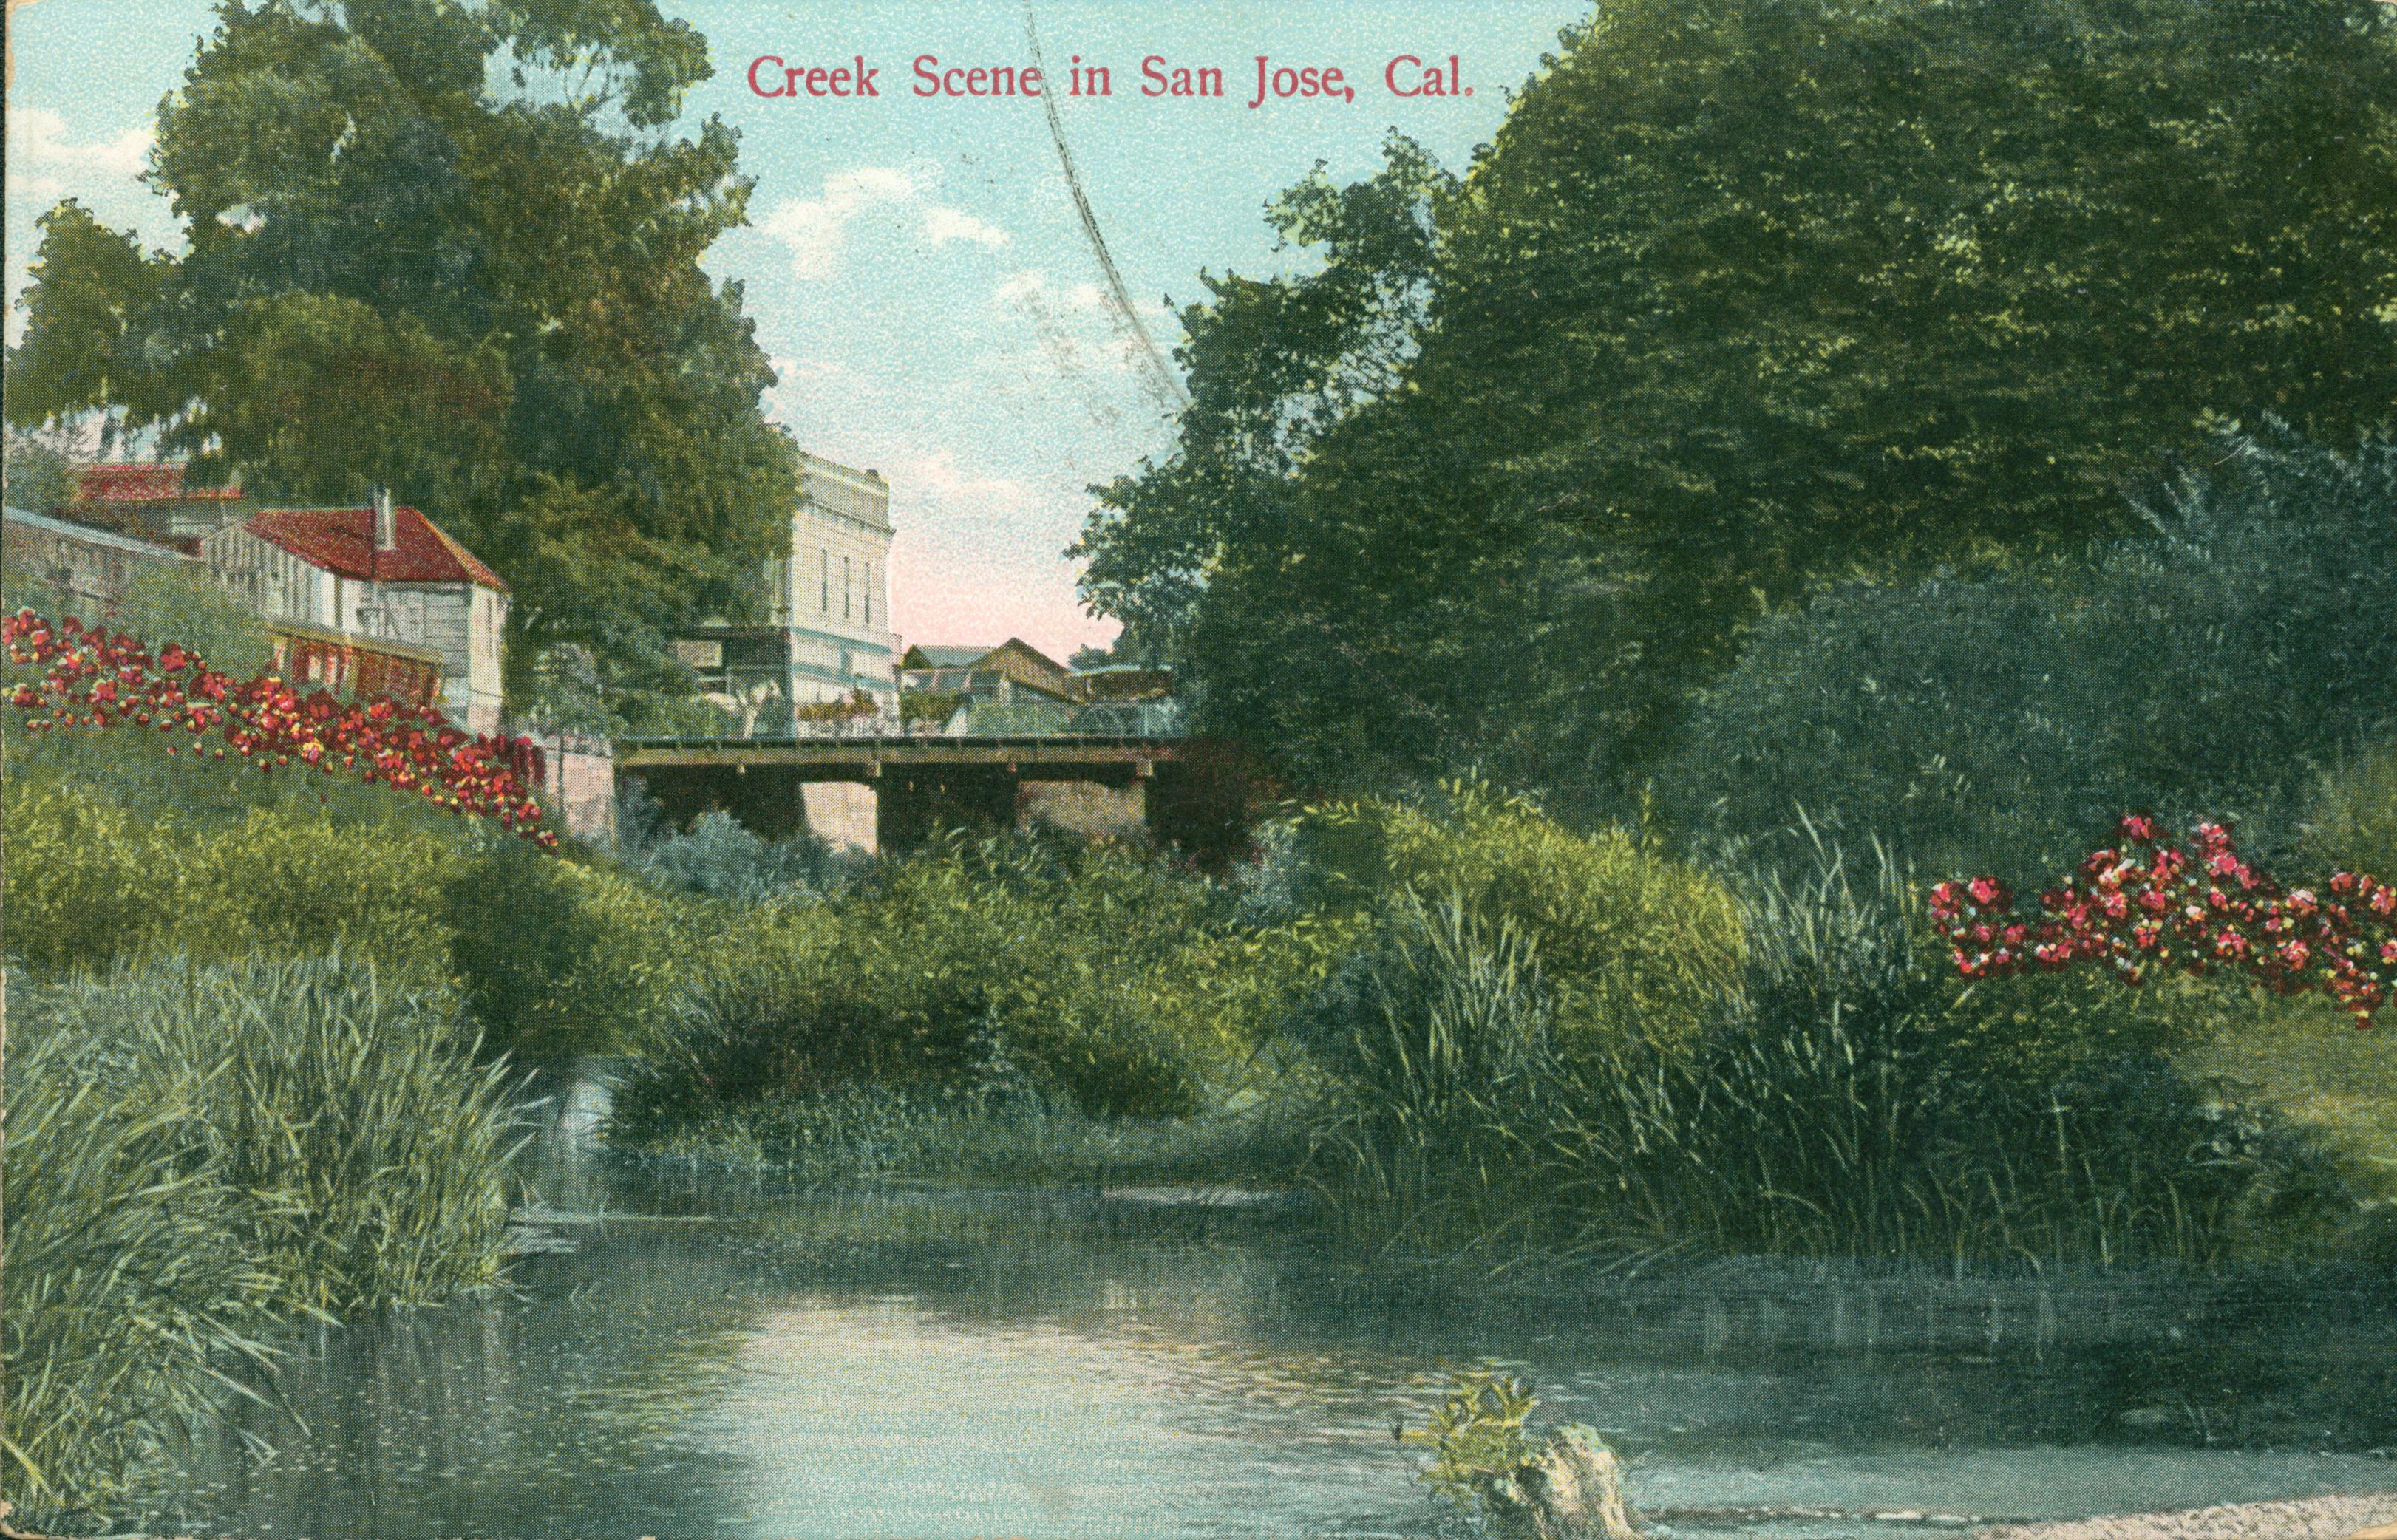 View of small creek surrounded by reeds, bushes and flowering bushes, buildings are high upon a bank with a bridge crossing the creek, horses lined up are on the bridge.  Large trees are in the background